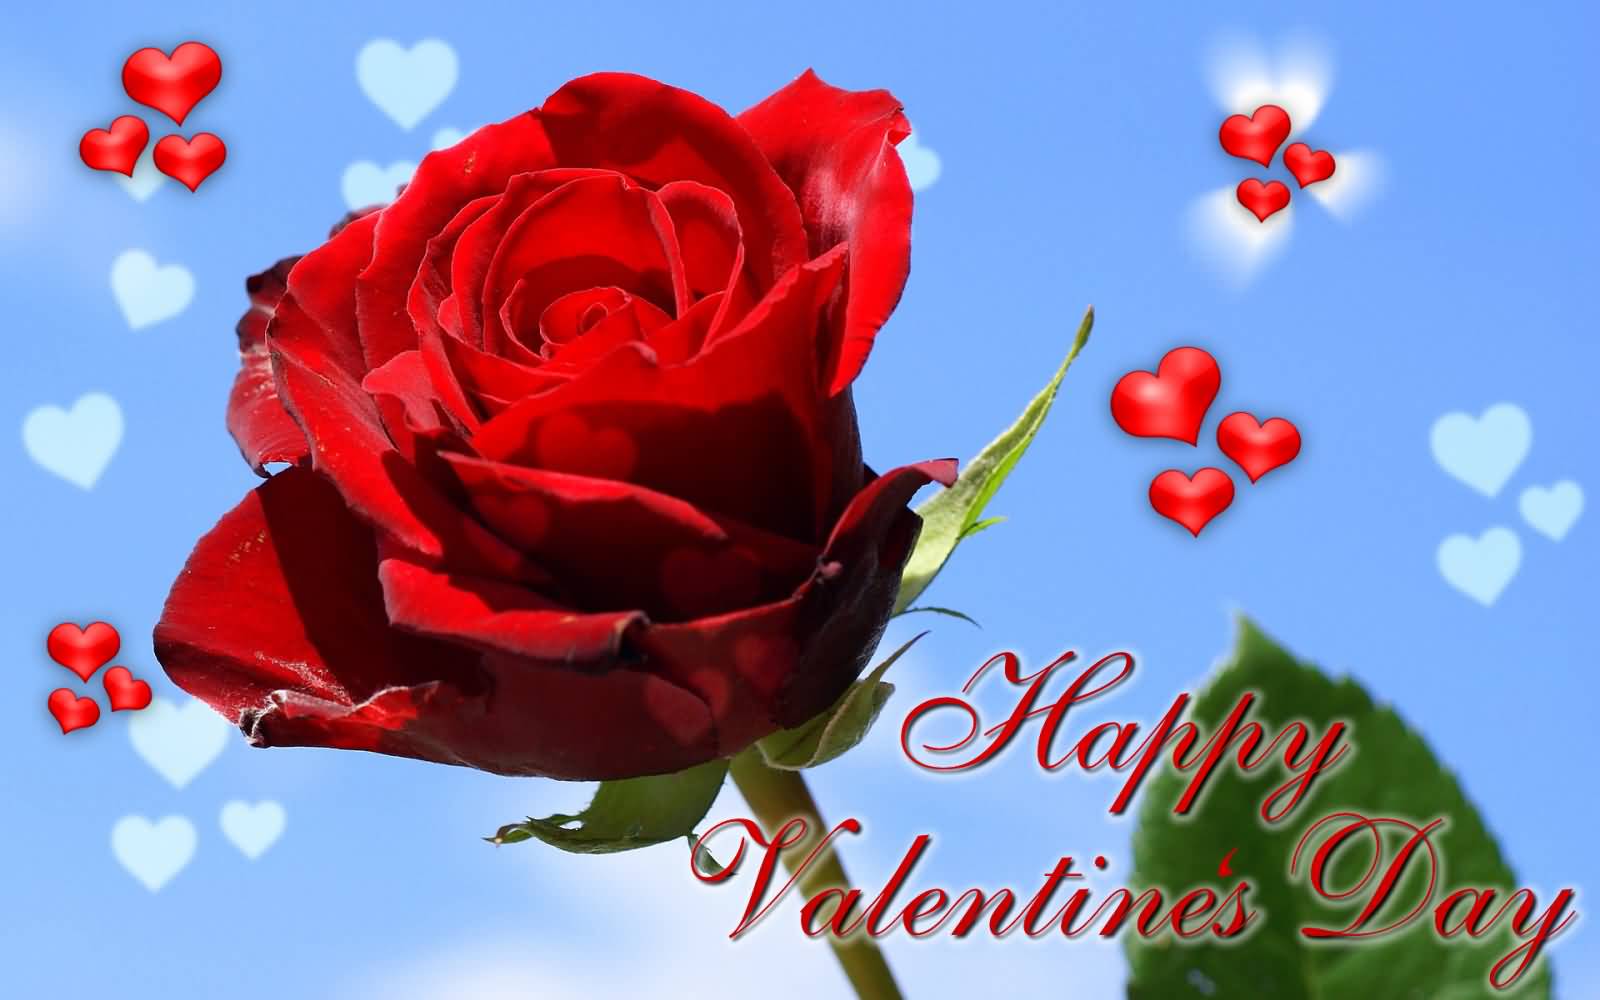 Happy Valentine's Day Rose Flower Bud And Hearts Wallpaper